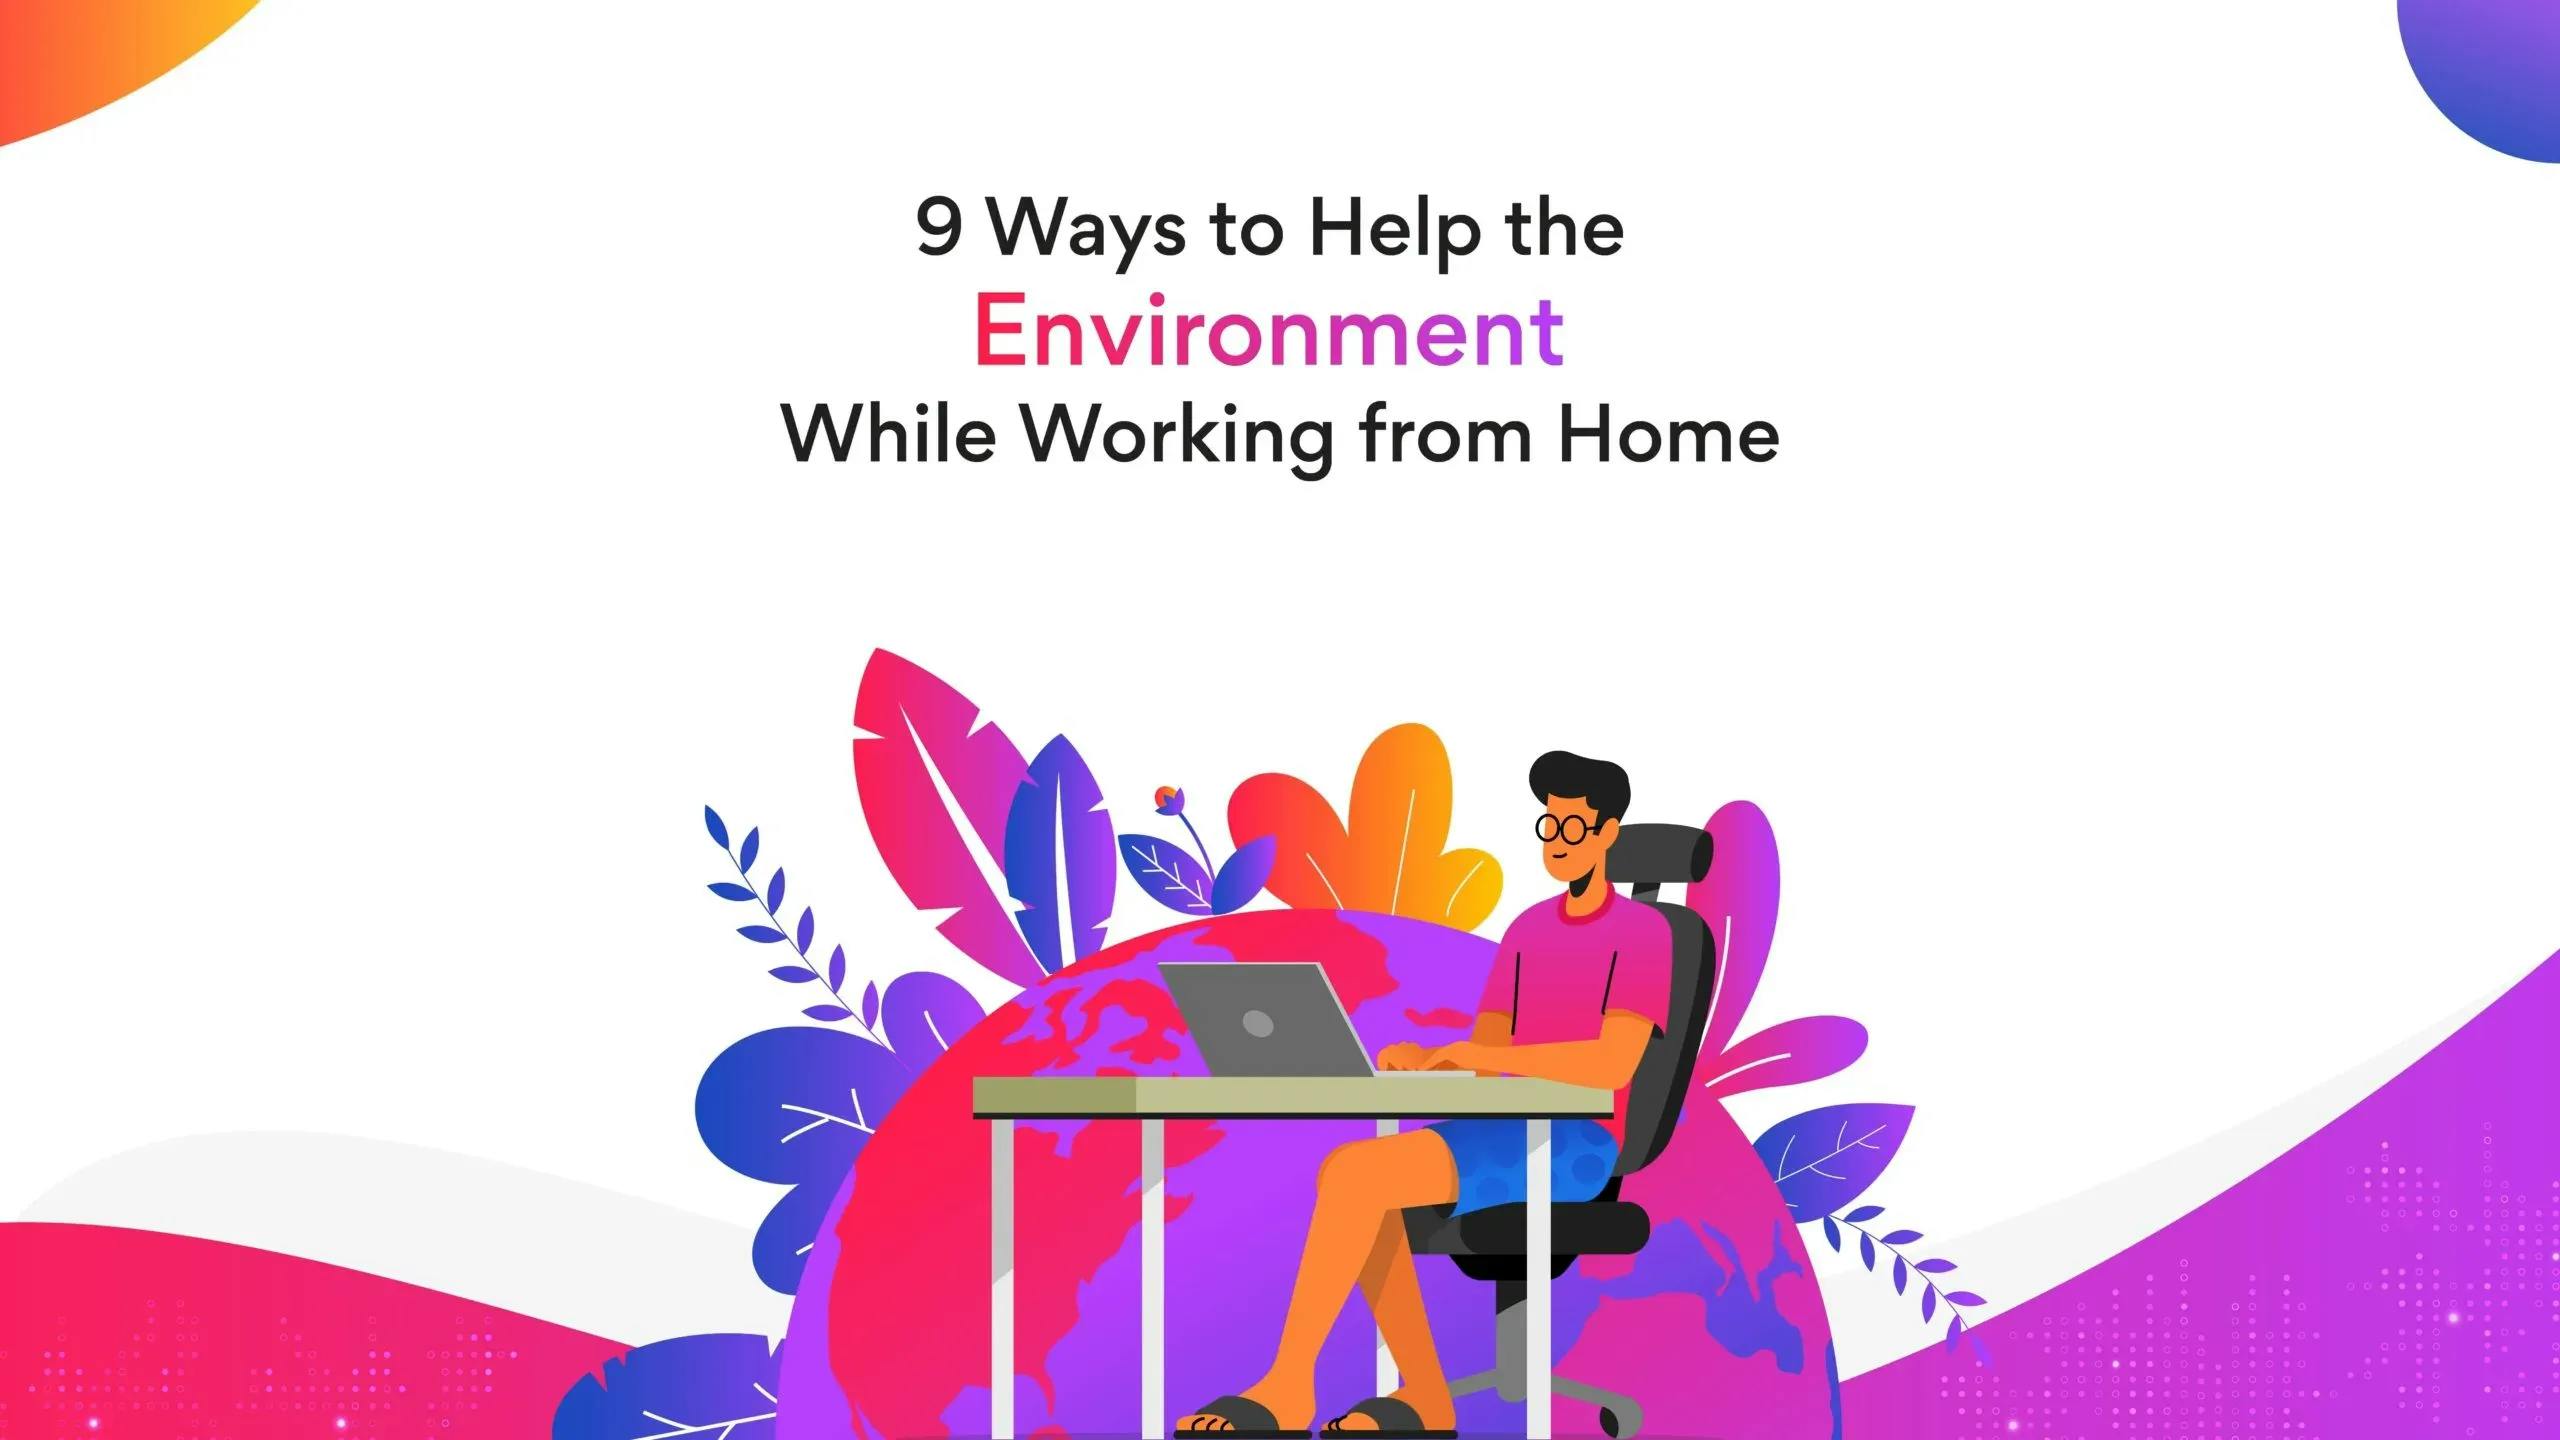 9 Ways to Help the Environment While Working from Home